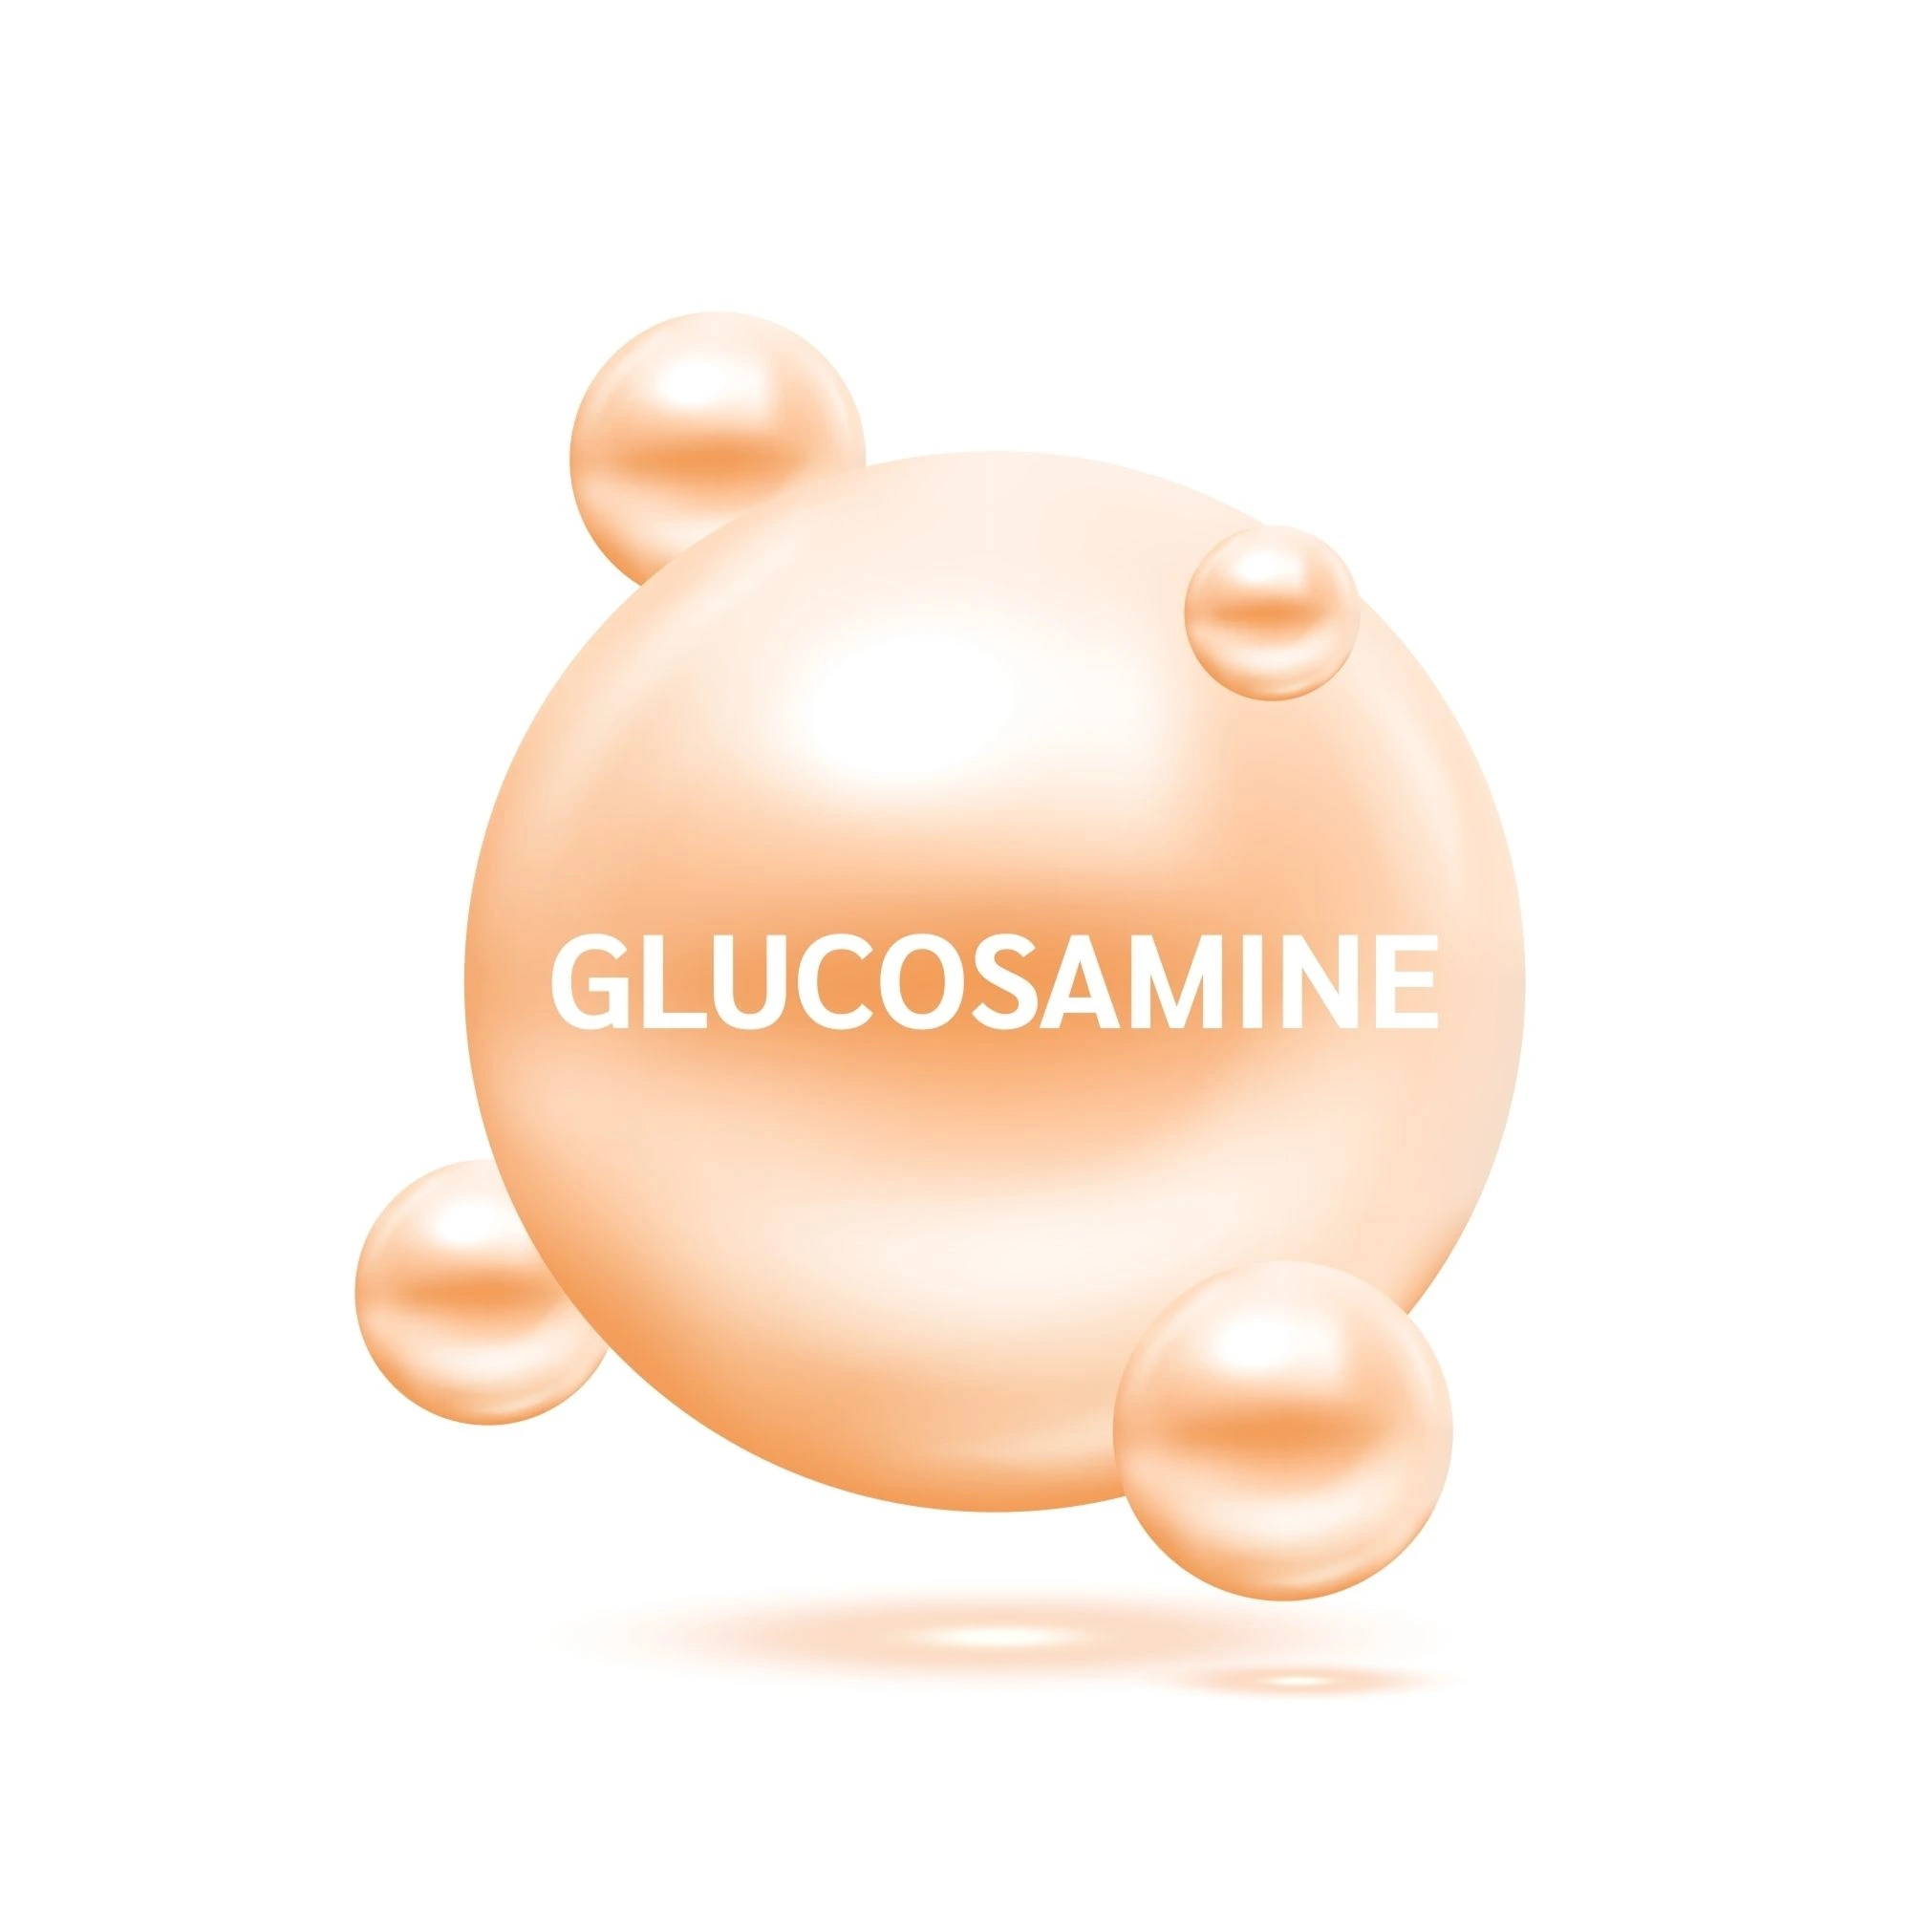 Other health benefits of glucosamine chondroitin capsules